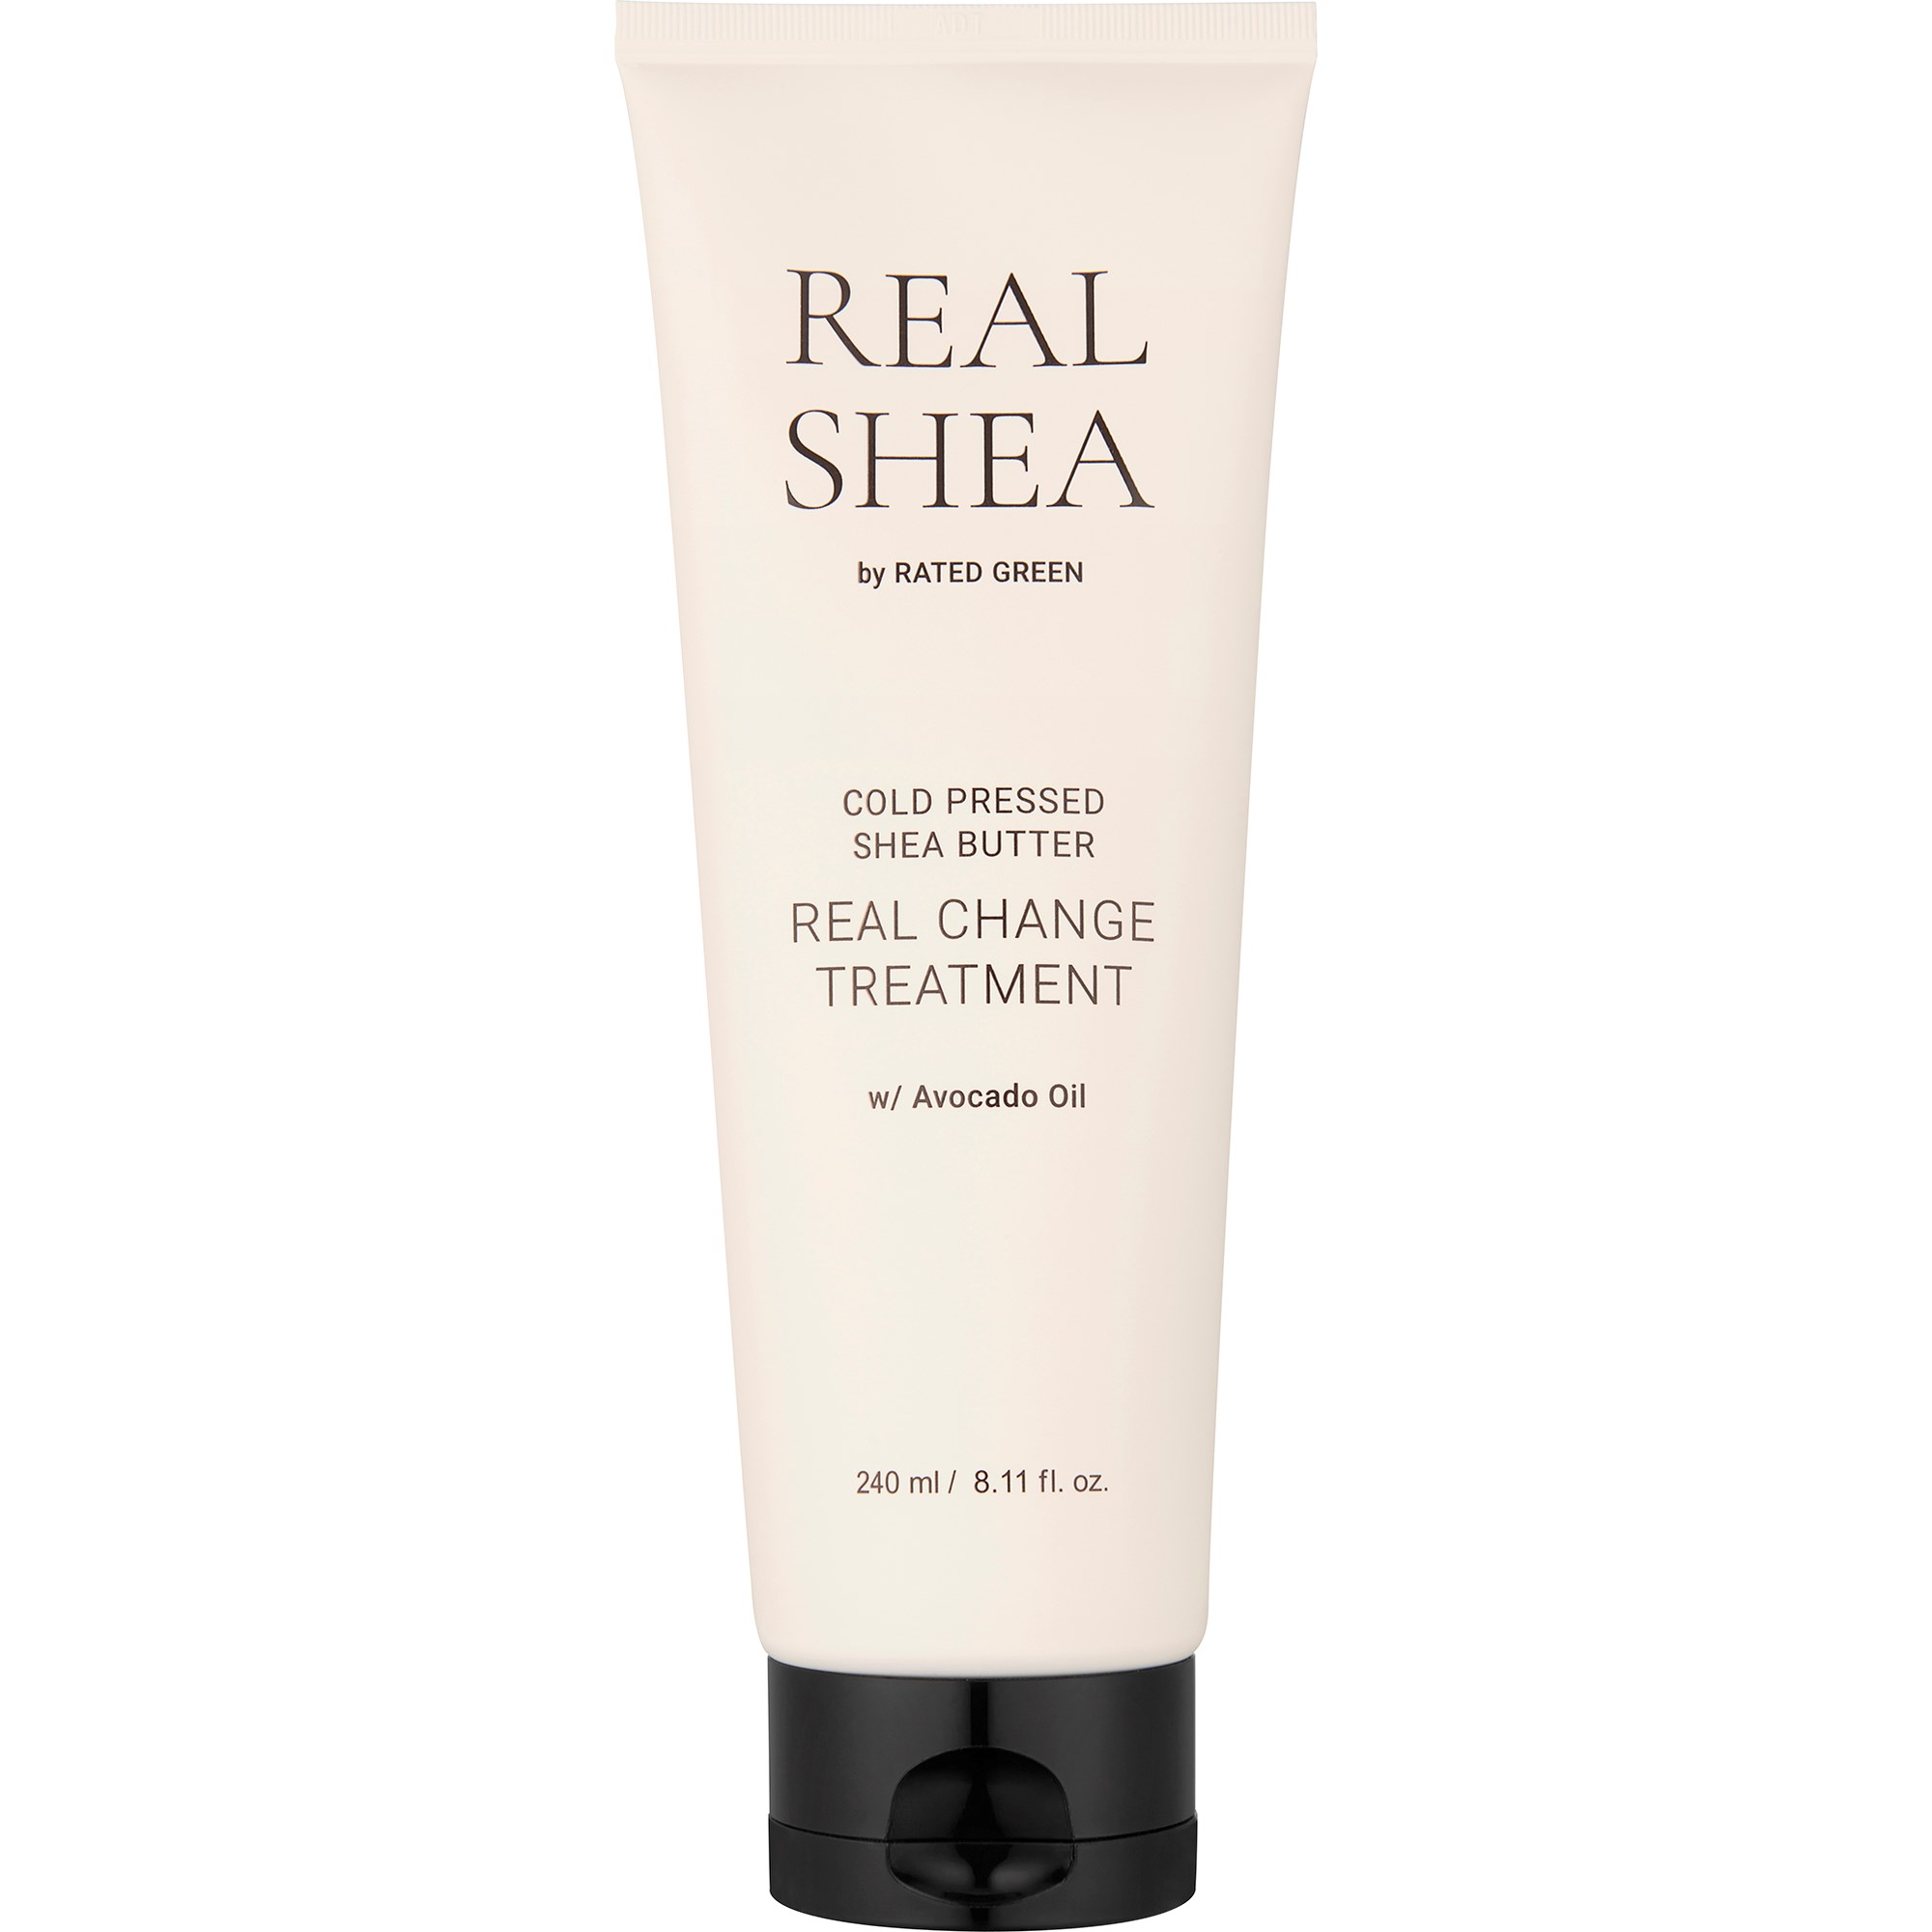 Bilde av Rated Green Real Shea Cold Pressed Shea Butter Real Change Treatment 2